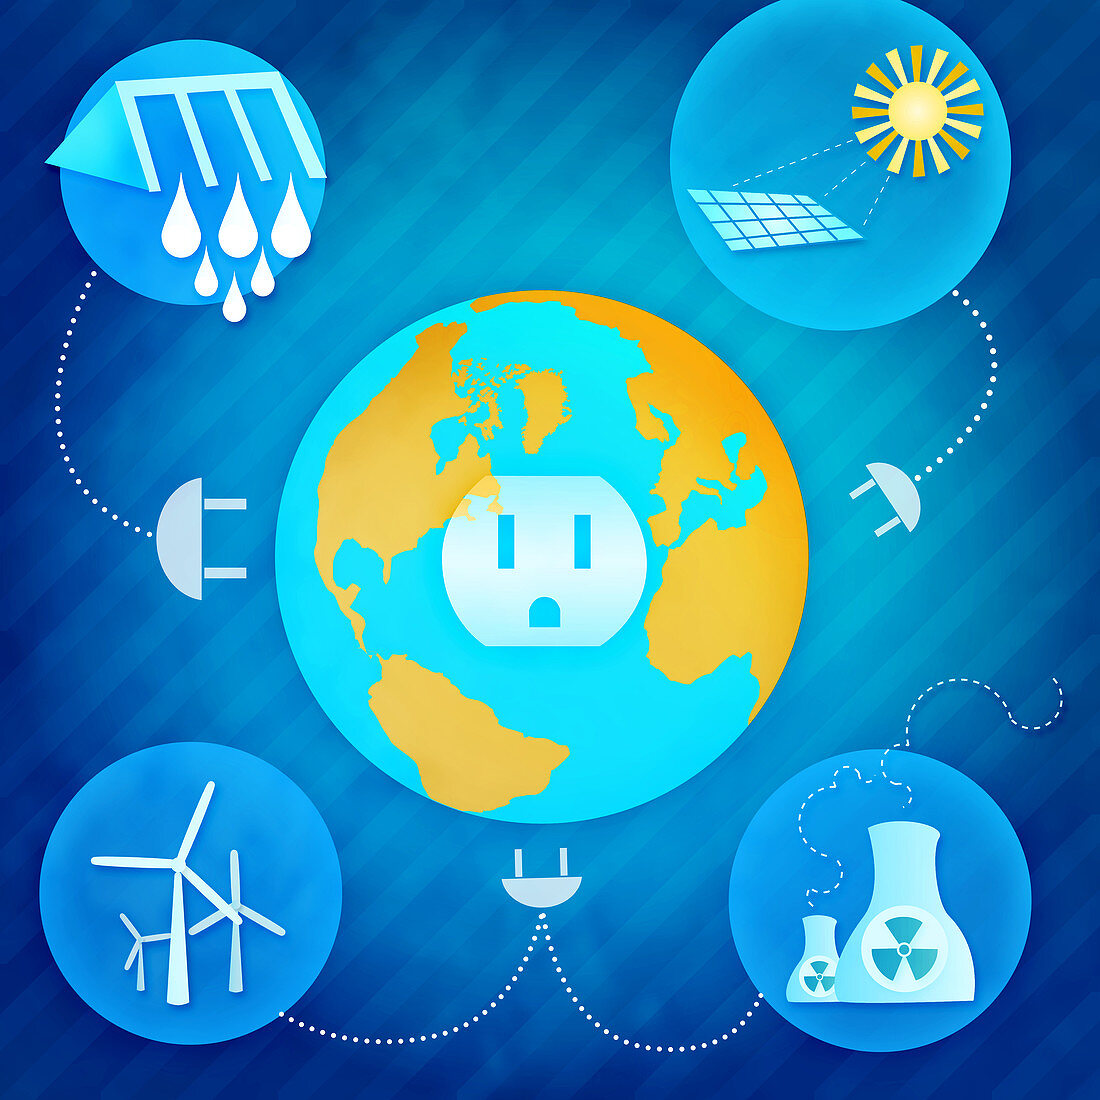 Resources of electricity production, illustration